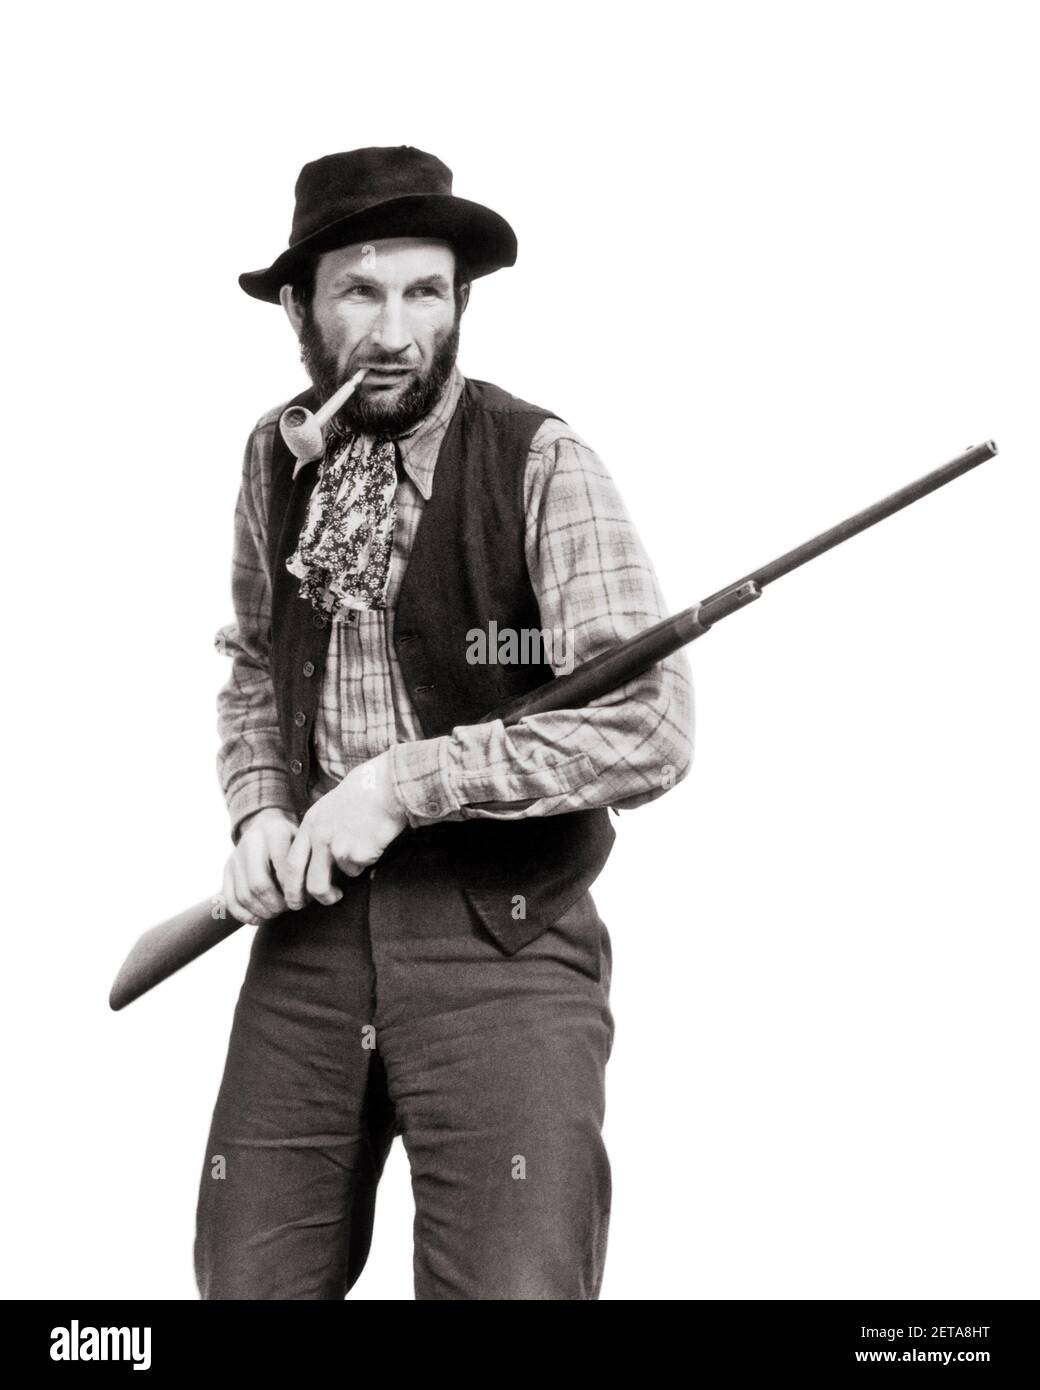 1930s MAN WESTERN MOVIE CHARACTER ACTOR BEARD SMOKING CORNCOB PIPE LOOKING ANGRY MEAN SUSPICIOUS HOLDING A RIFLE GUN - c740 HAR001 HARS ANGER FEAR CAREER BALANCE LIFESTYLE ACTOR JOBS PIPE RURAL HEALTHINESS COPY SPACE FULL-LENGTH HALF-LENGTH PERSONS RIFLE MALES RISK WESTERN PROFESSION ENTERTAINMENT CONFIDENCE ROBBER VEST EXPRESSIONS MIDDLE-AGED B&W MIDDLE-AGED MAN PERFORMING ARTS MEAN SKILL OCCUPATION SKILLS WELLNESS ADVENTURE DANGEROUS PERFORMER PIPES STRENGTH TOBACCO STRATEGY CAREERS EXCITEMENT LABOR PRIDE BAD HABIT BANDANA EMPLOYMENT ENTERTAINER FACIAL HAIR OCCUPATIONS SMOKER NICOTINE Stock Photo